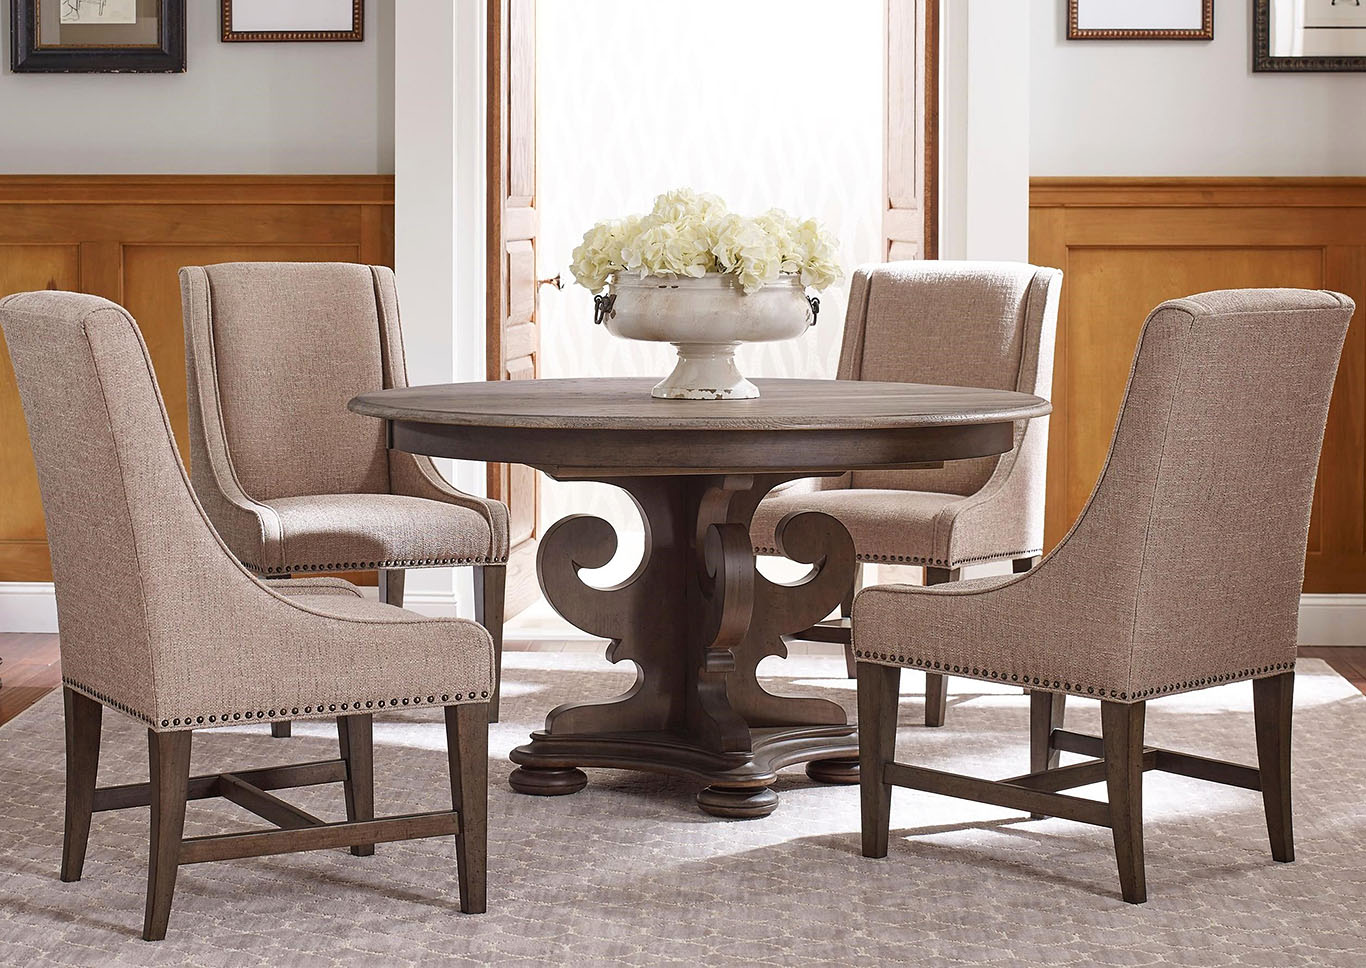 Greyson Greystone Round Dining Set W 4 Host Chairs Penland S Furniture